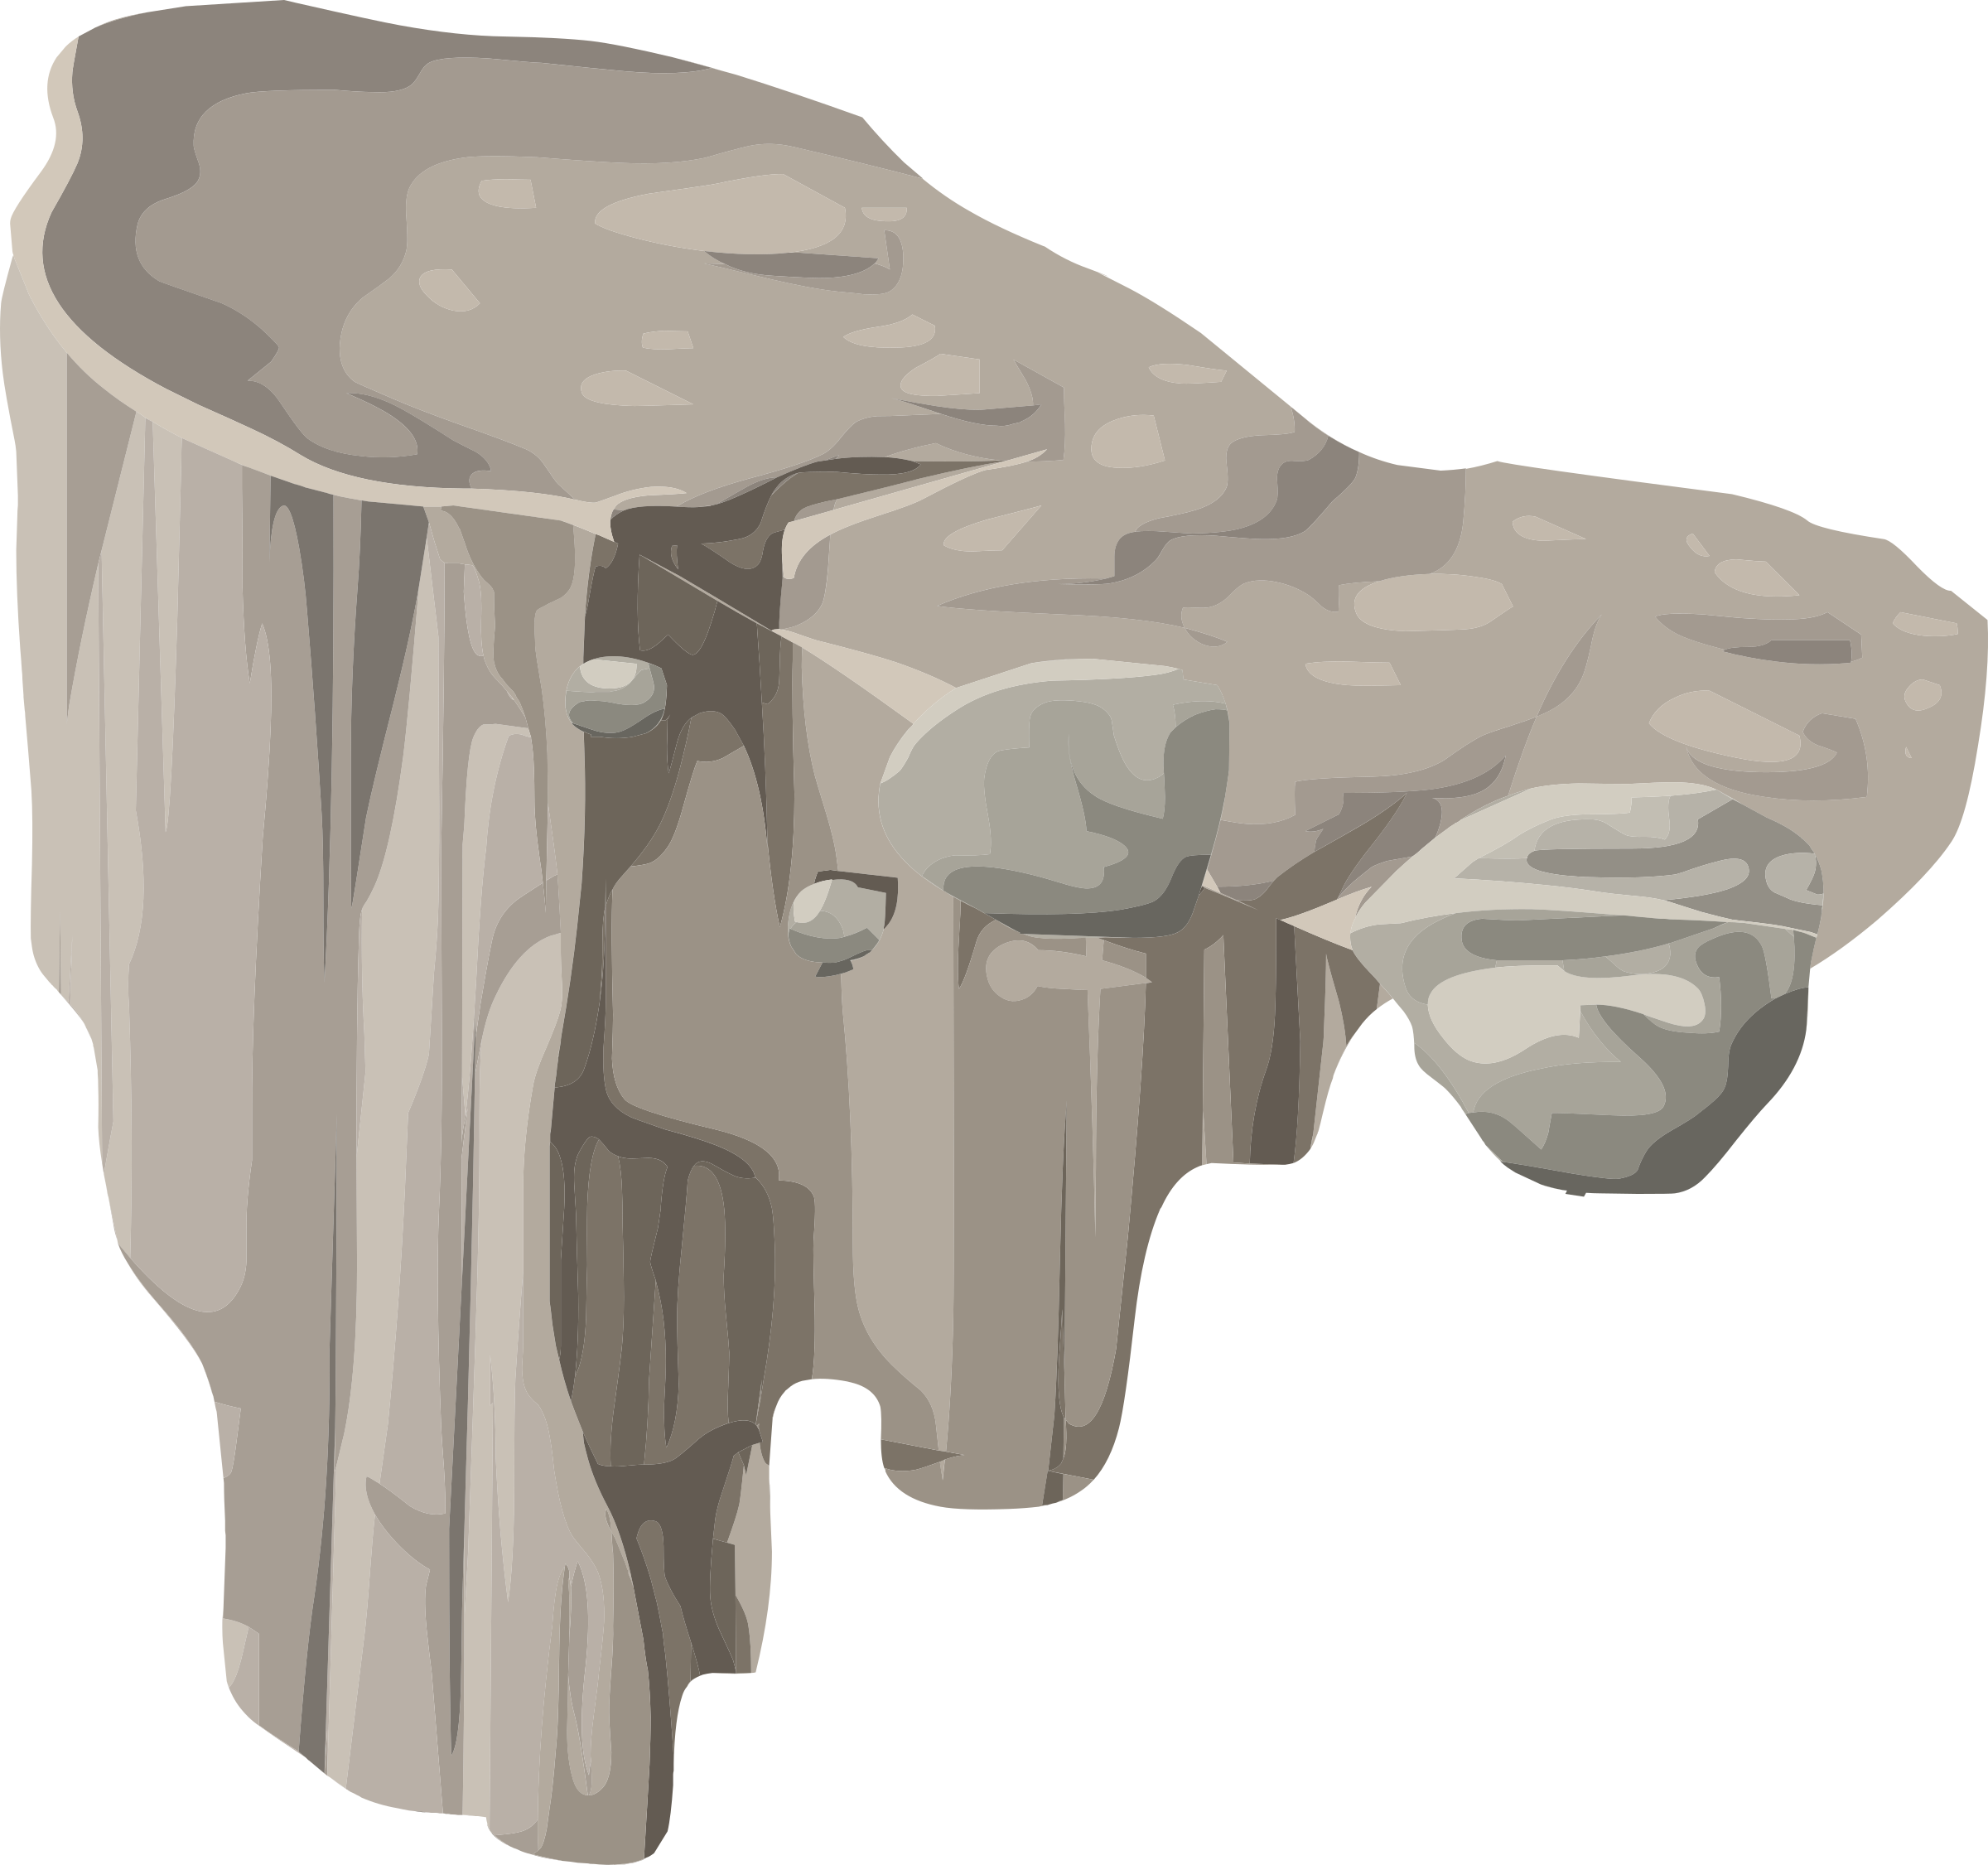 Cliff clipart ledge, Cliff ledge Transparent FREE for download on